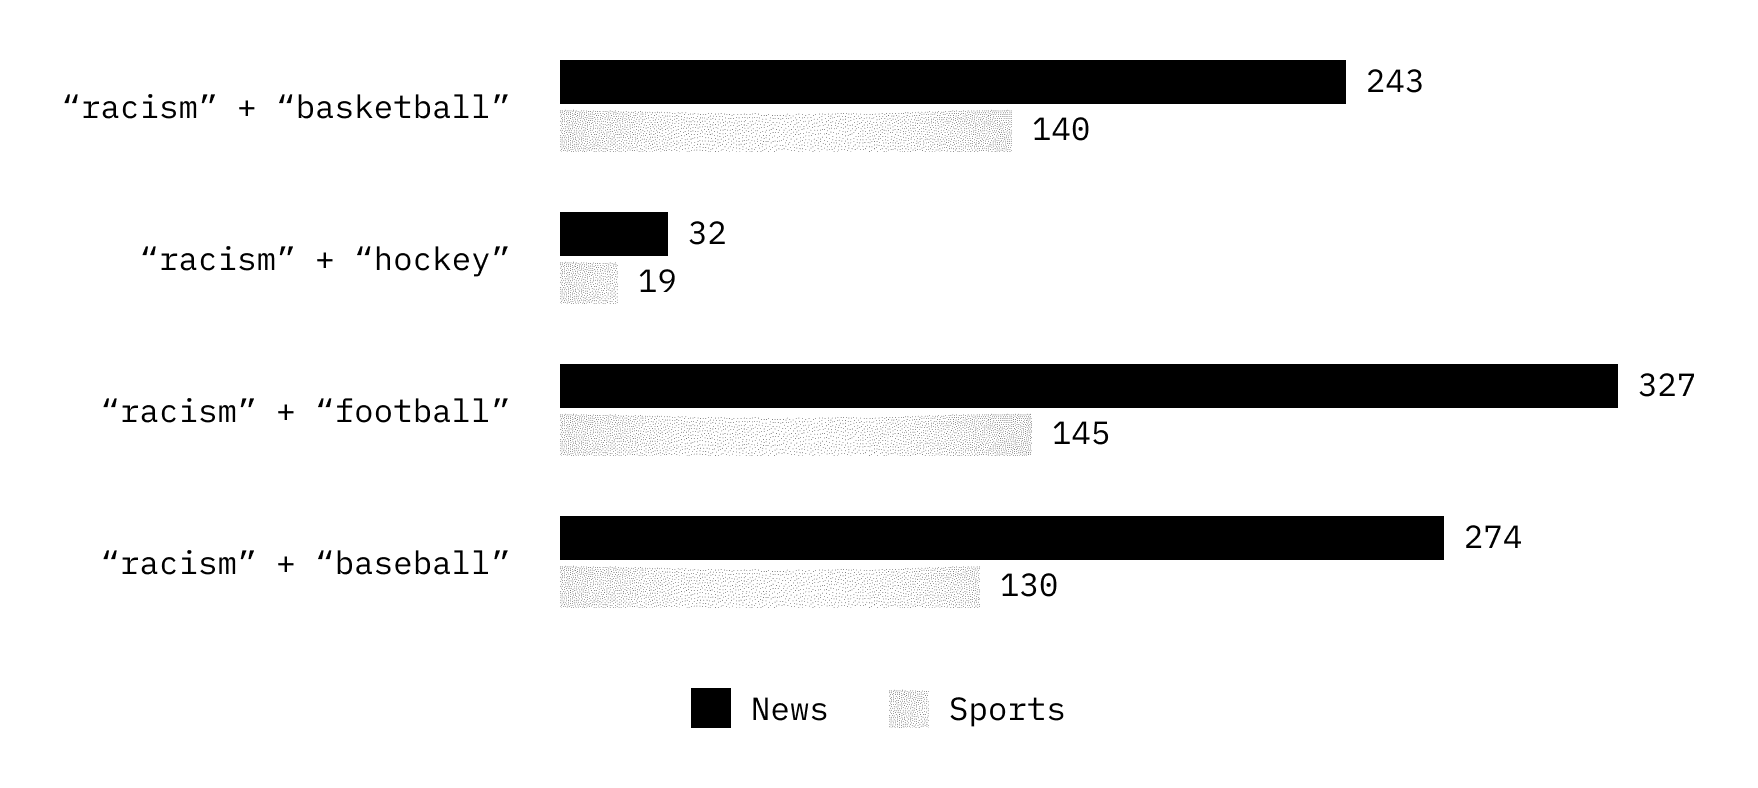 Chart showing usage of the terms 'racism' in NYTimes coverage of various sports, comparing usage in Sports and News sections.